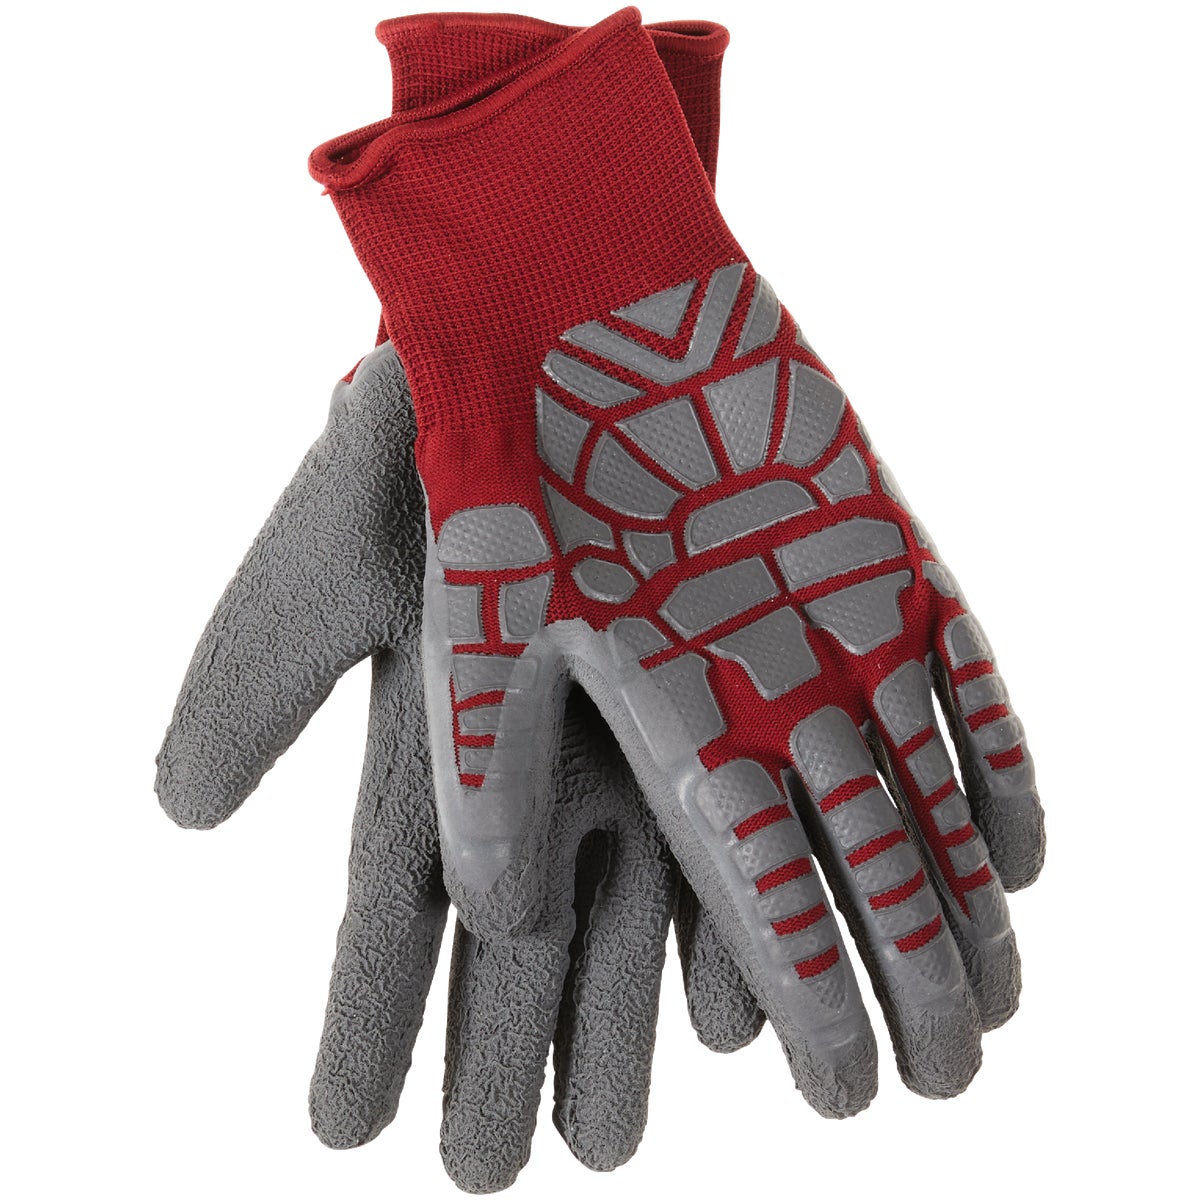 Boss Grip Protect Men's Medium/Large Coated Glove with Micro Armor